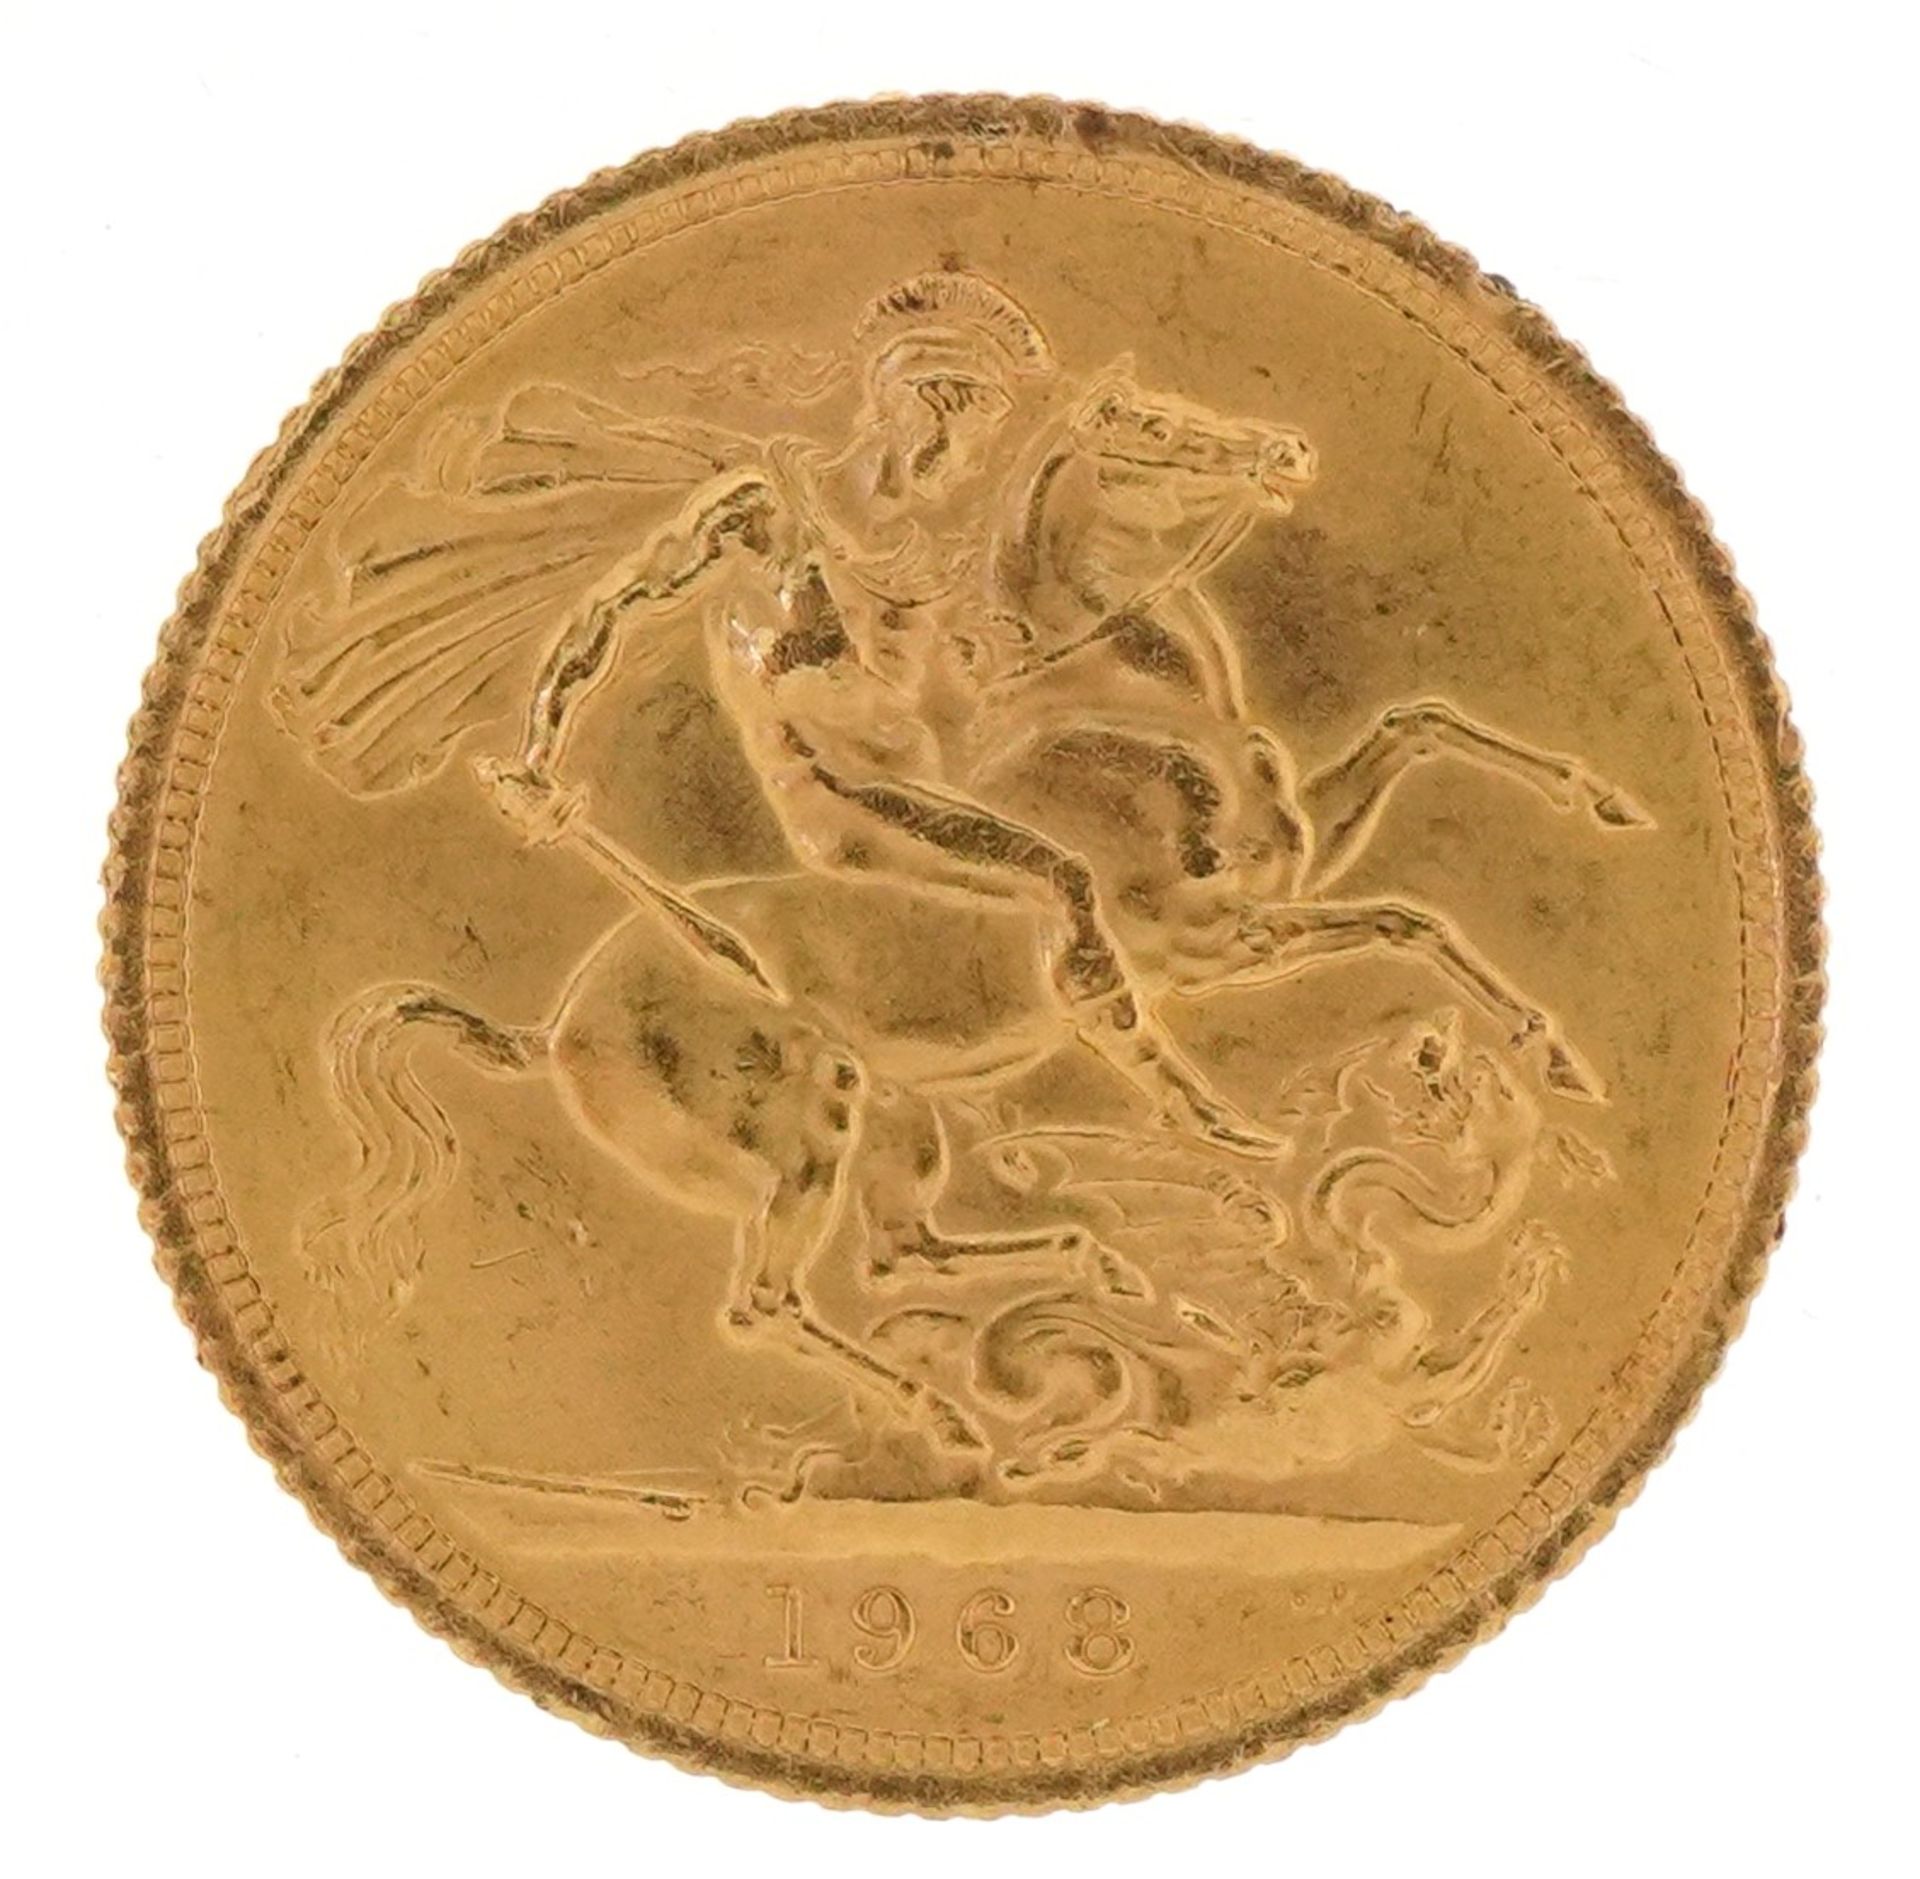 Elizabeth II 1968 gold sovereign : For further information on this lot please visit www.